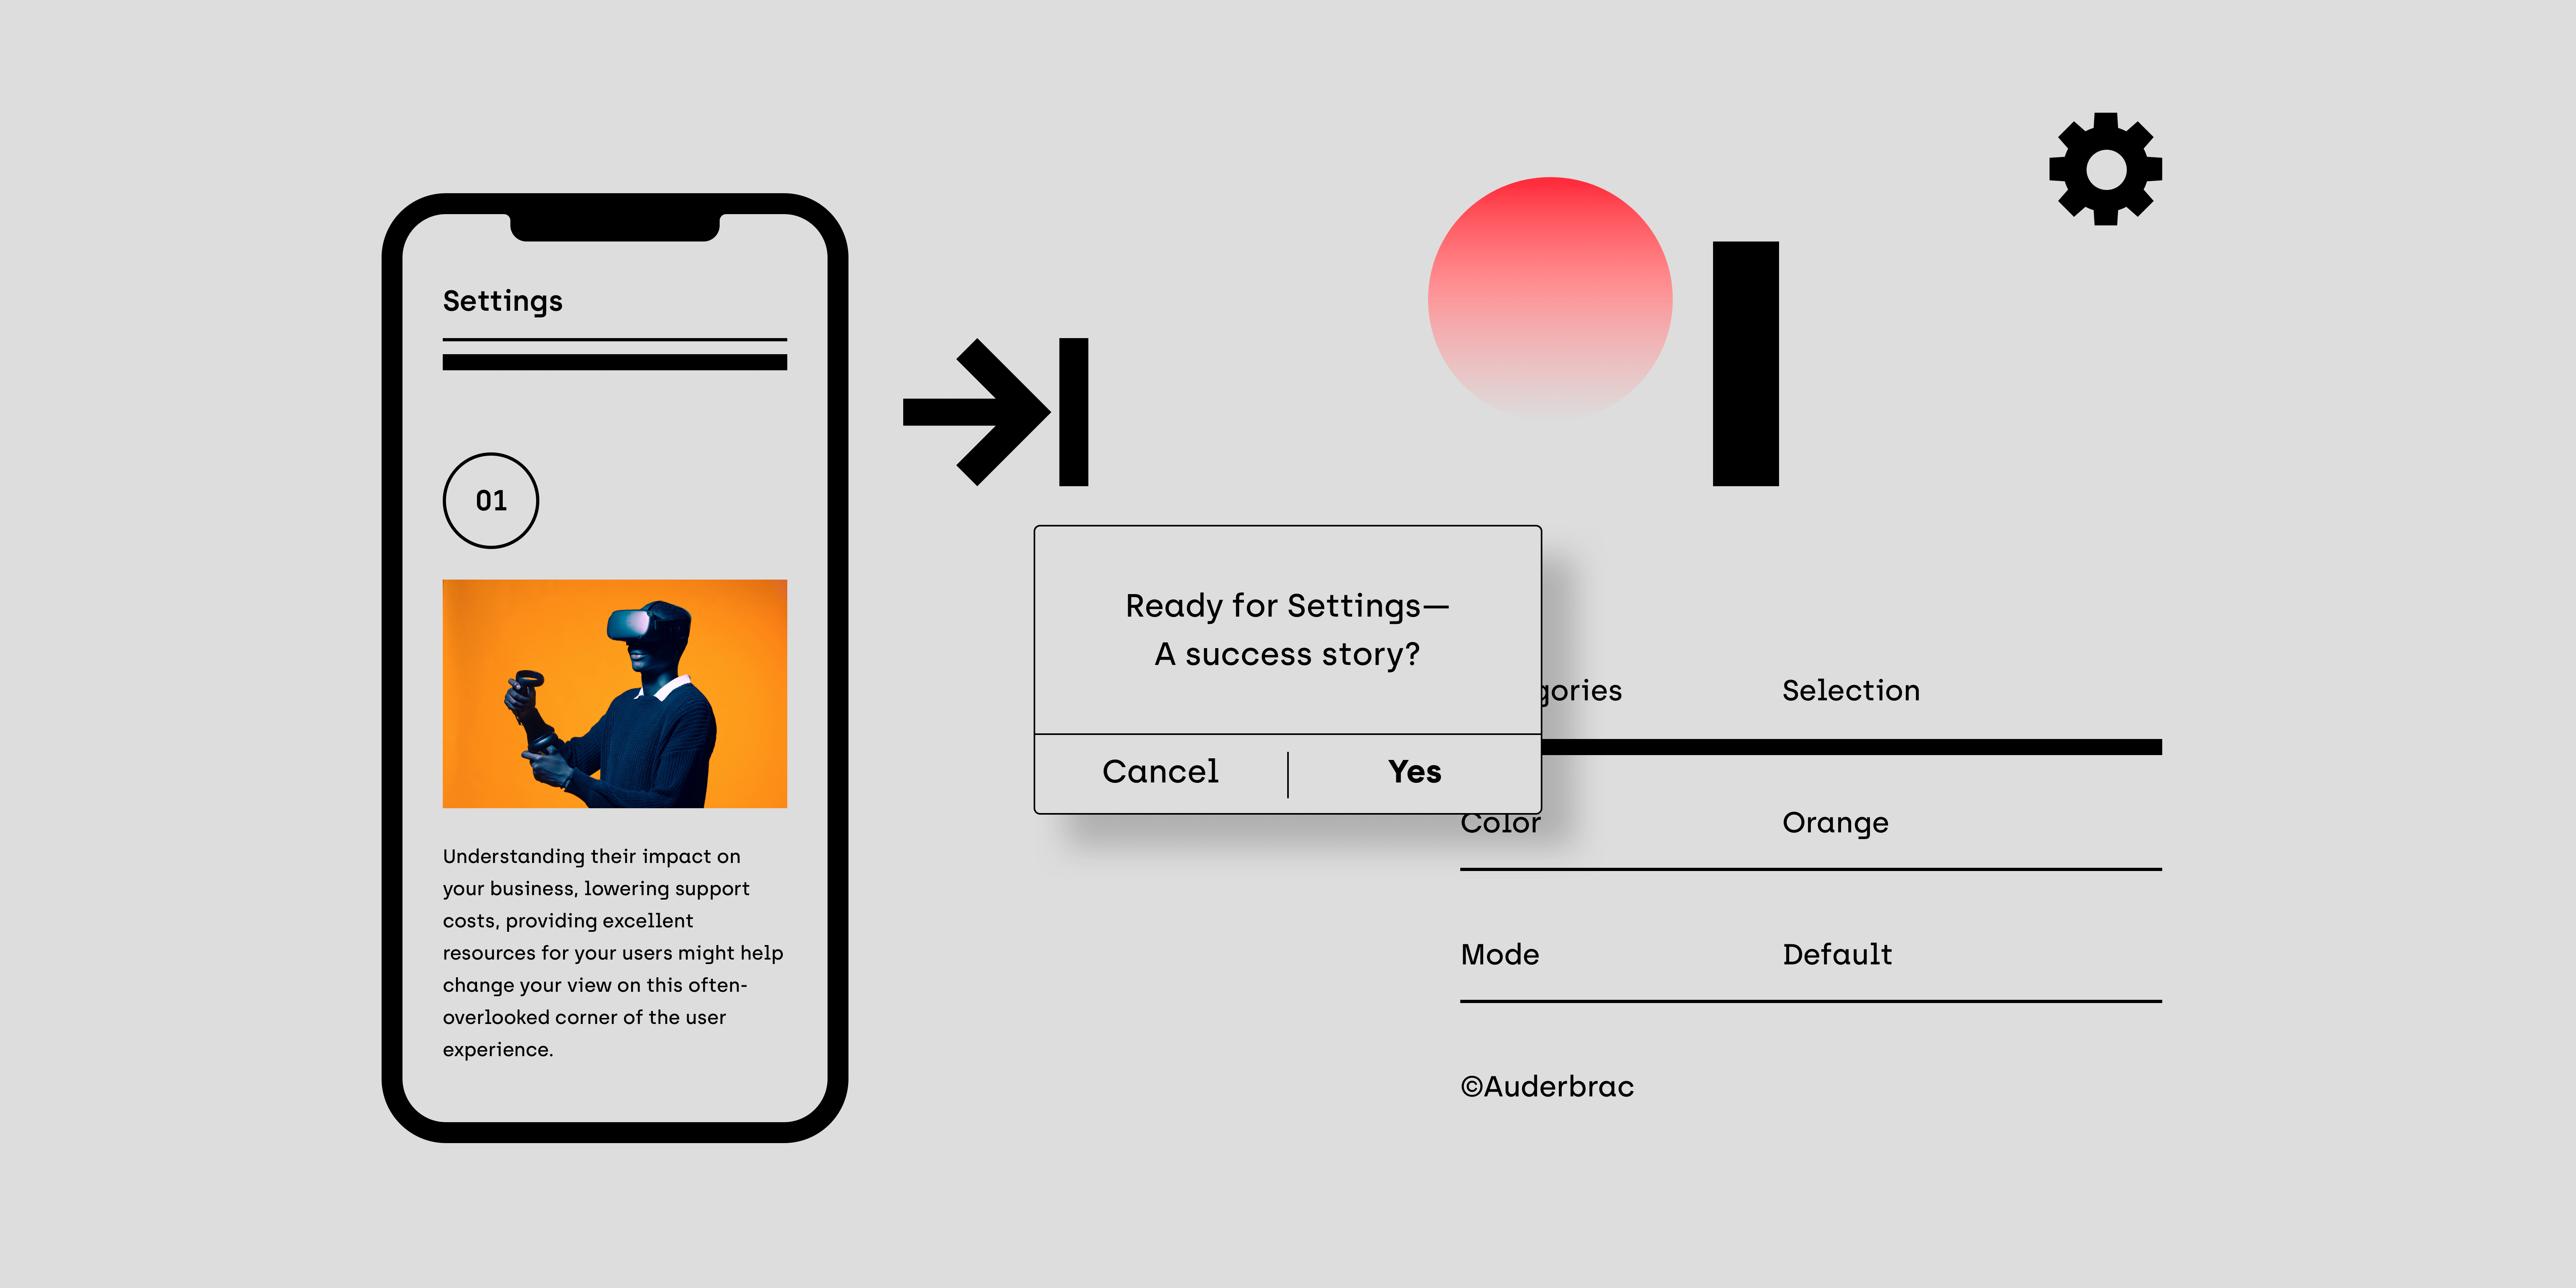 Settings—A Success Story: Tips for improving your UX by designing products  with smart settings.